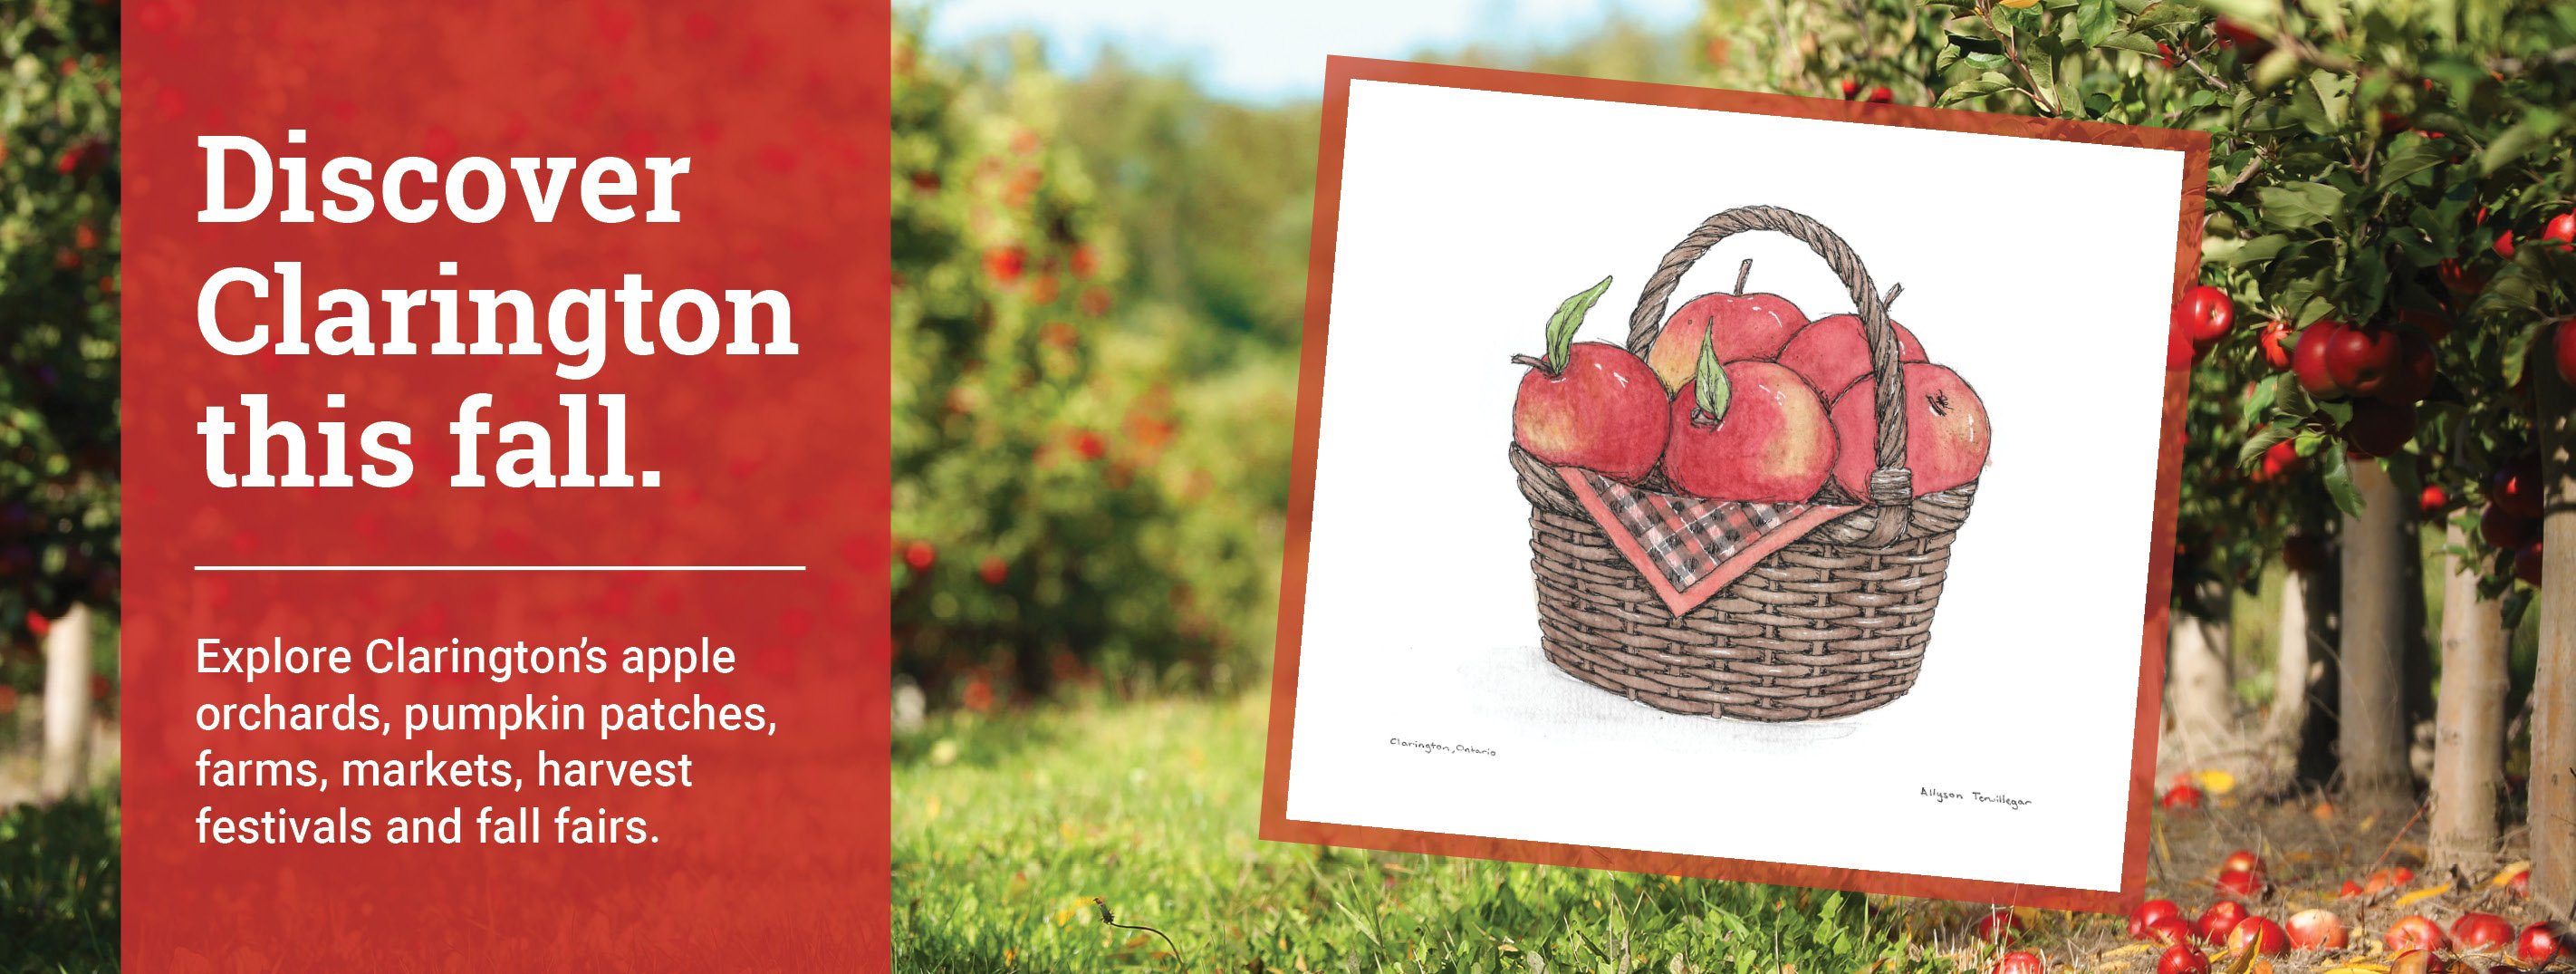 Discover Clarington this fall. - Image of an apple orchard with an apple basket illustration on top